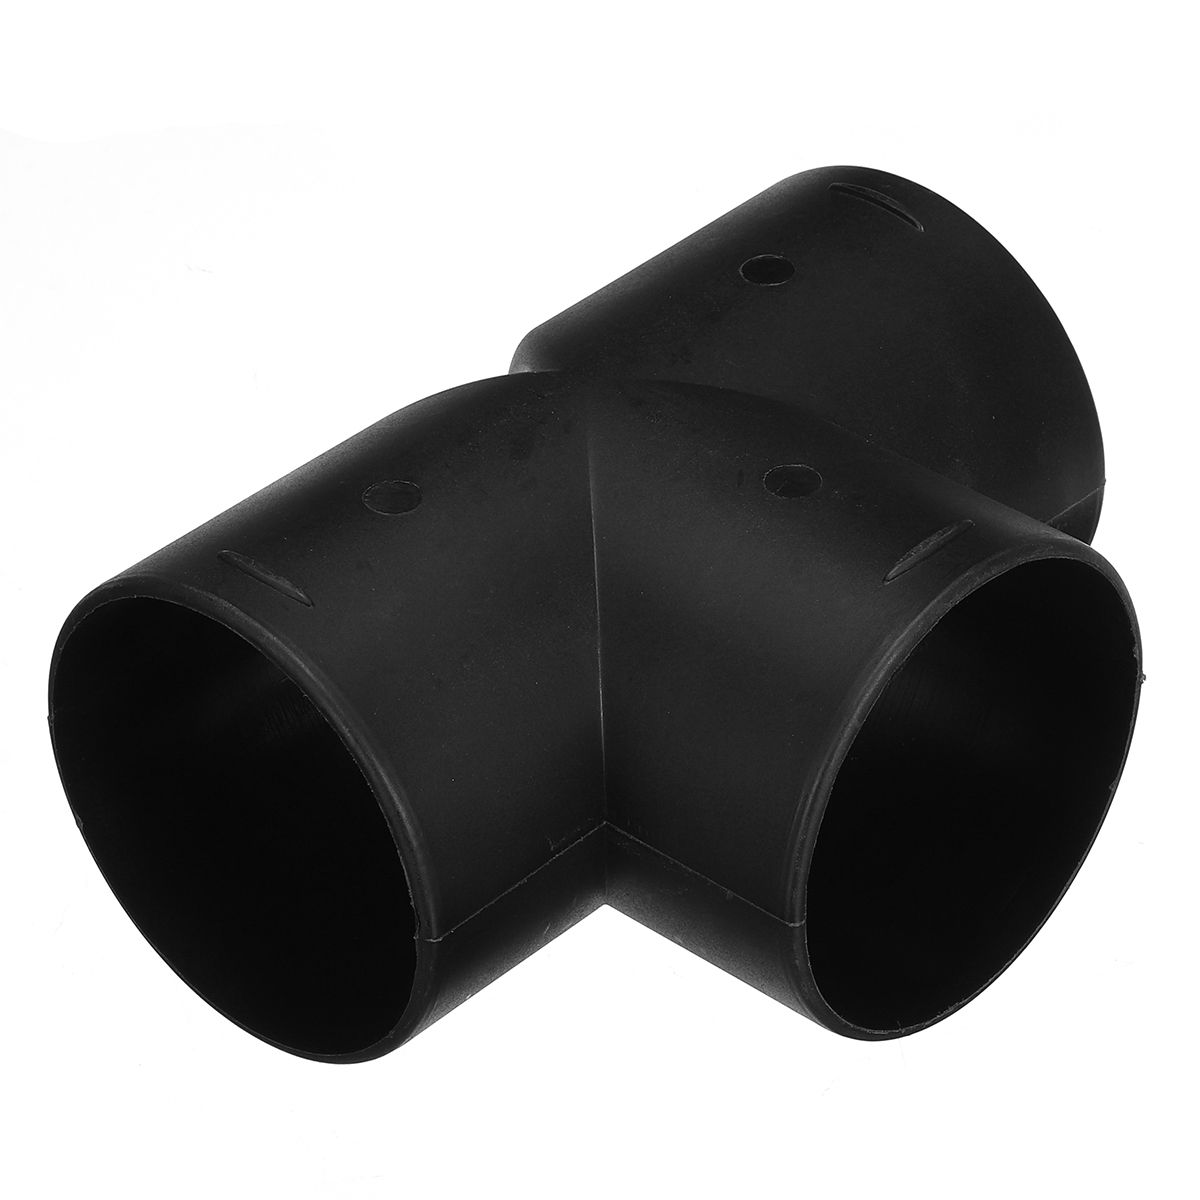 75mm-Car-Heater-Air-Vent-Ducting-T-Piece-Elbow-Pipe-Outlet-Exhaust-Connector-1444678